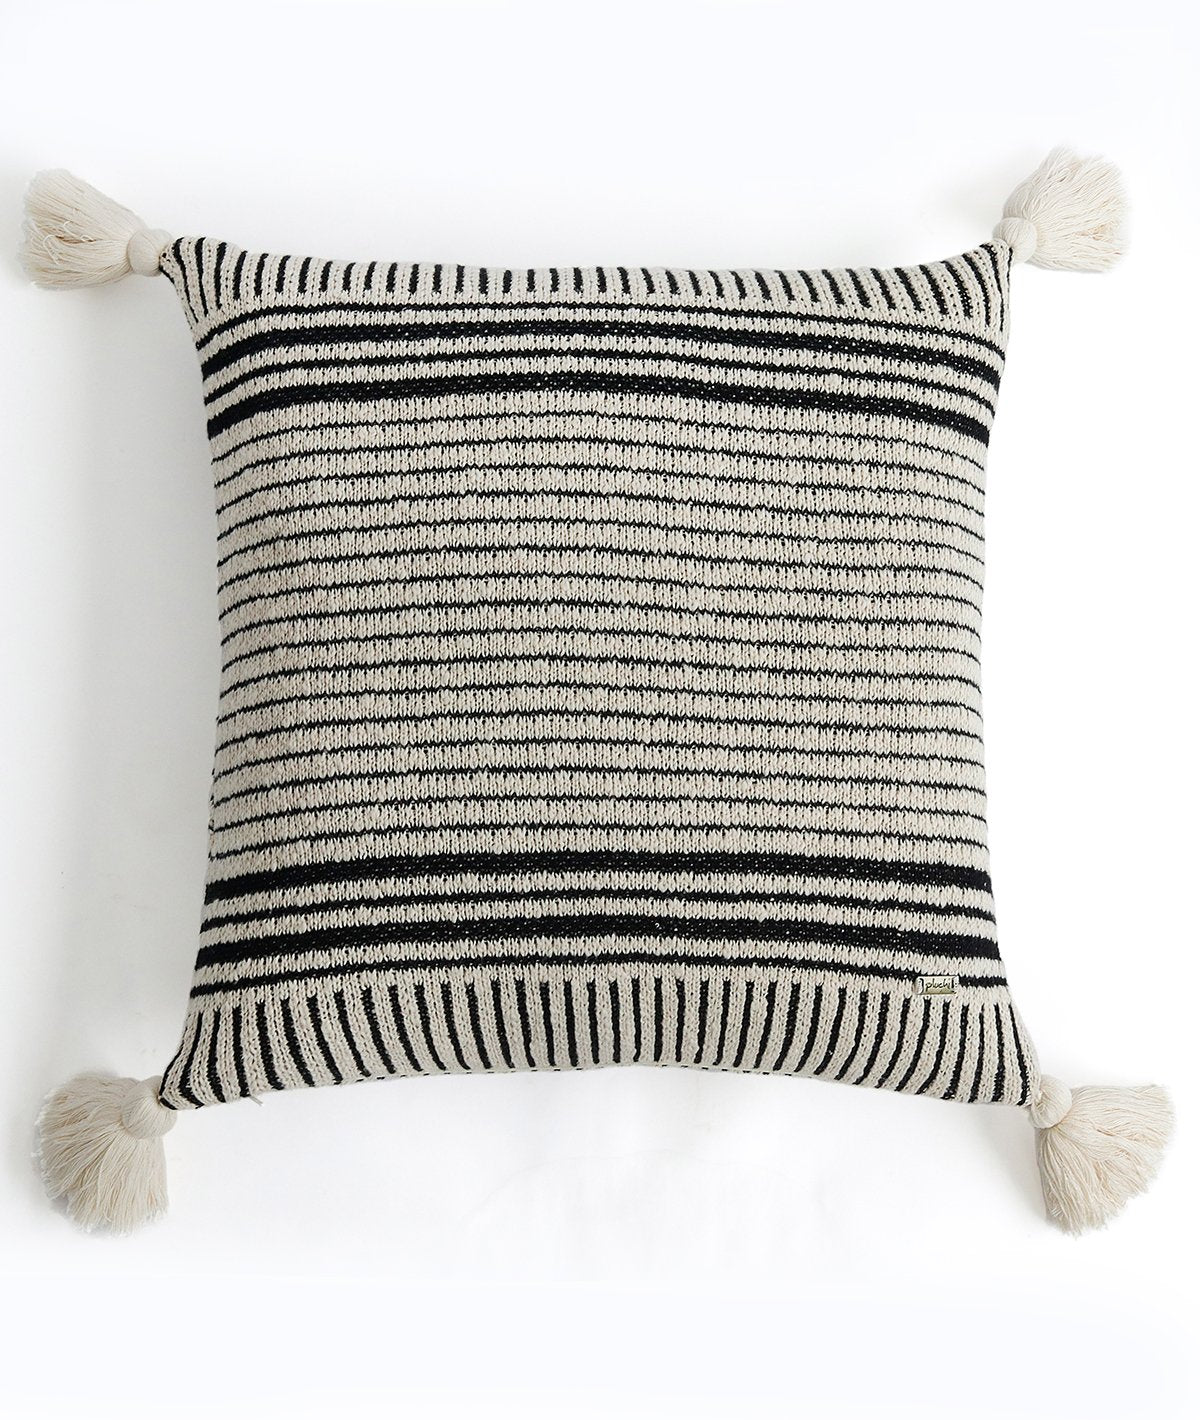 Stripe Square Cotton Knitted Decorative Natural & Black Color 18 x 18 Inches Cushion Cover